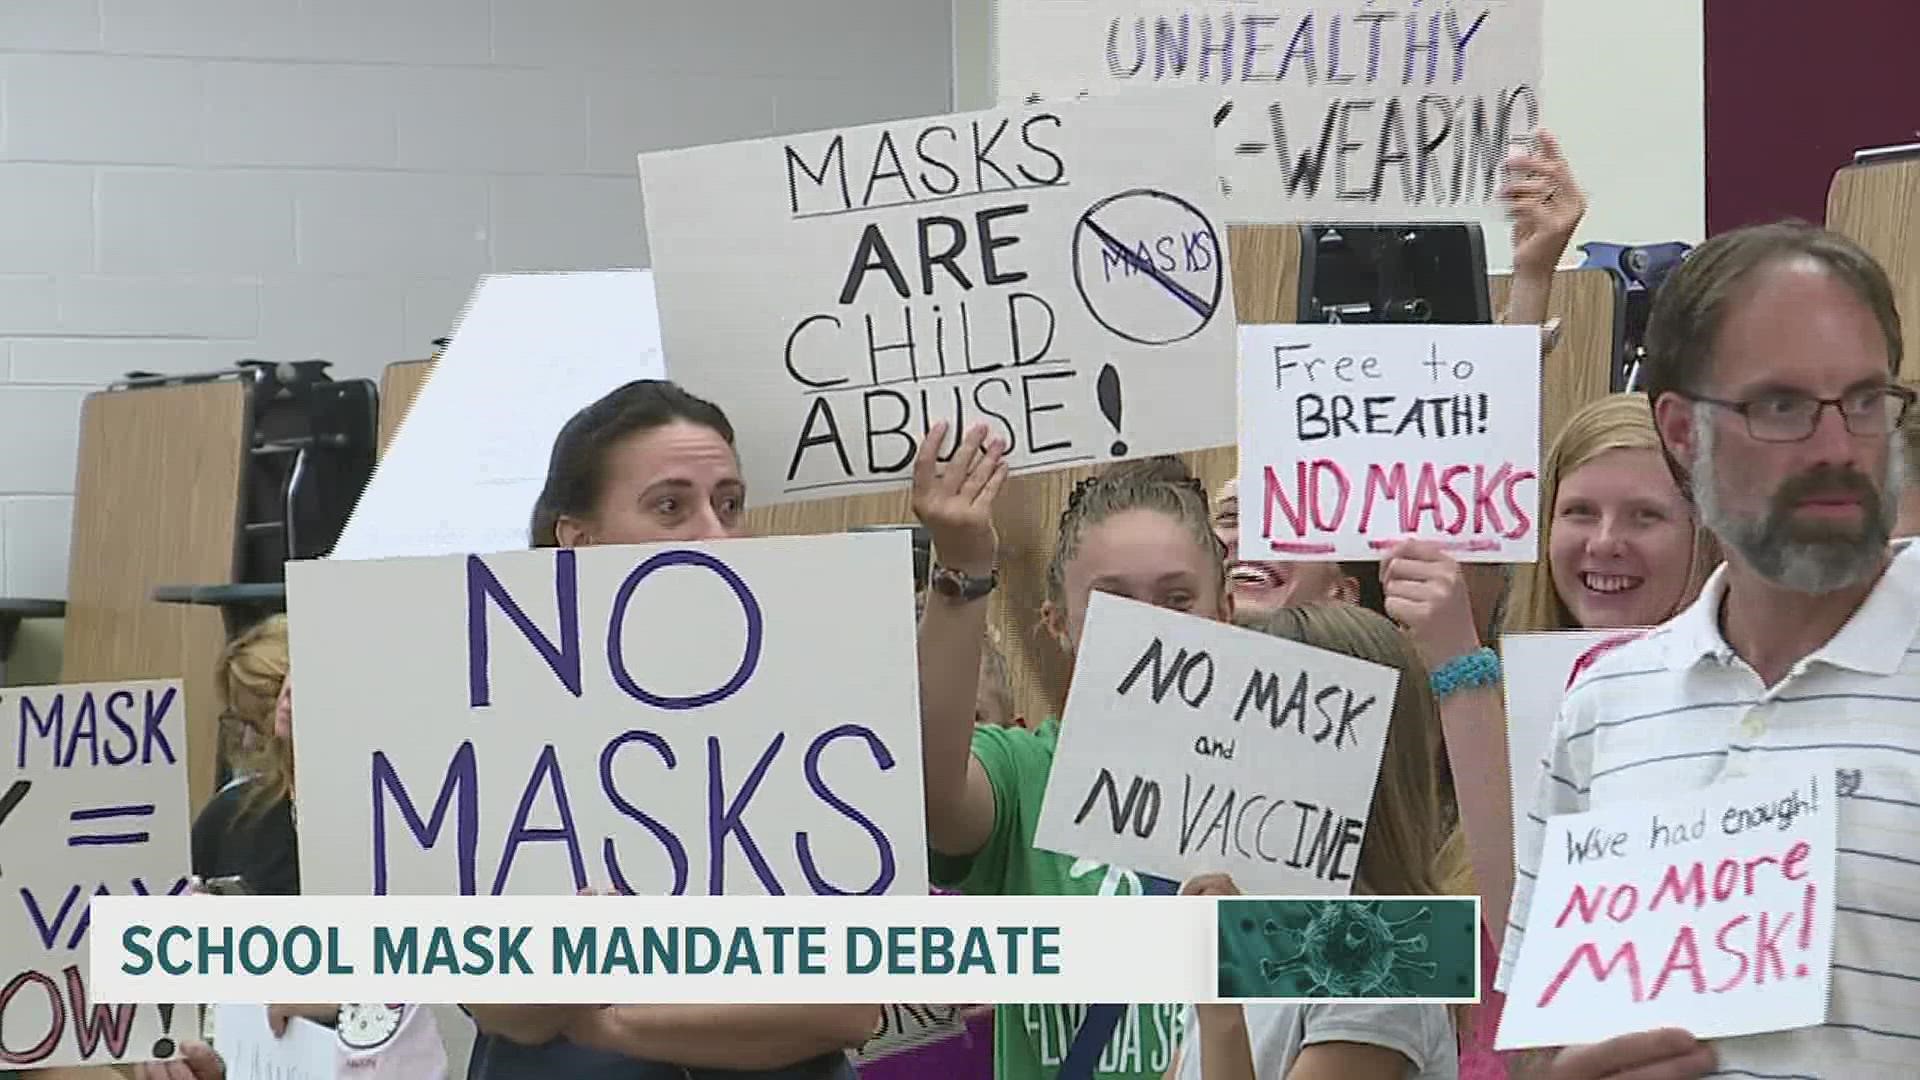 Parents and school district administrators wage fierce debate over whether to require that students wear masks.